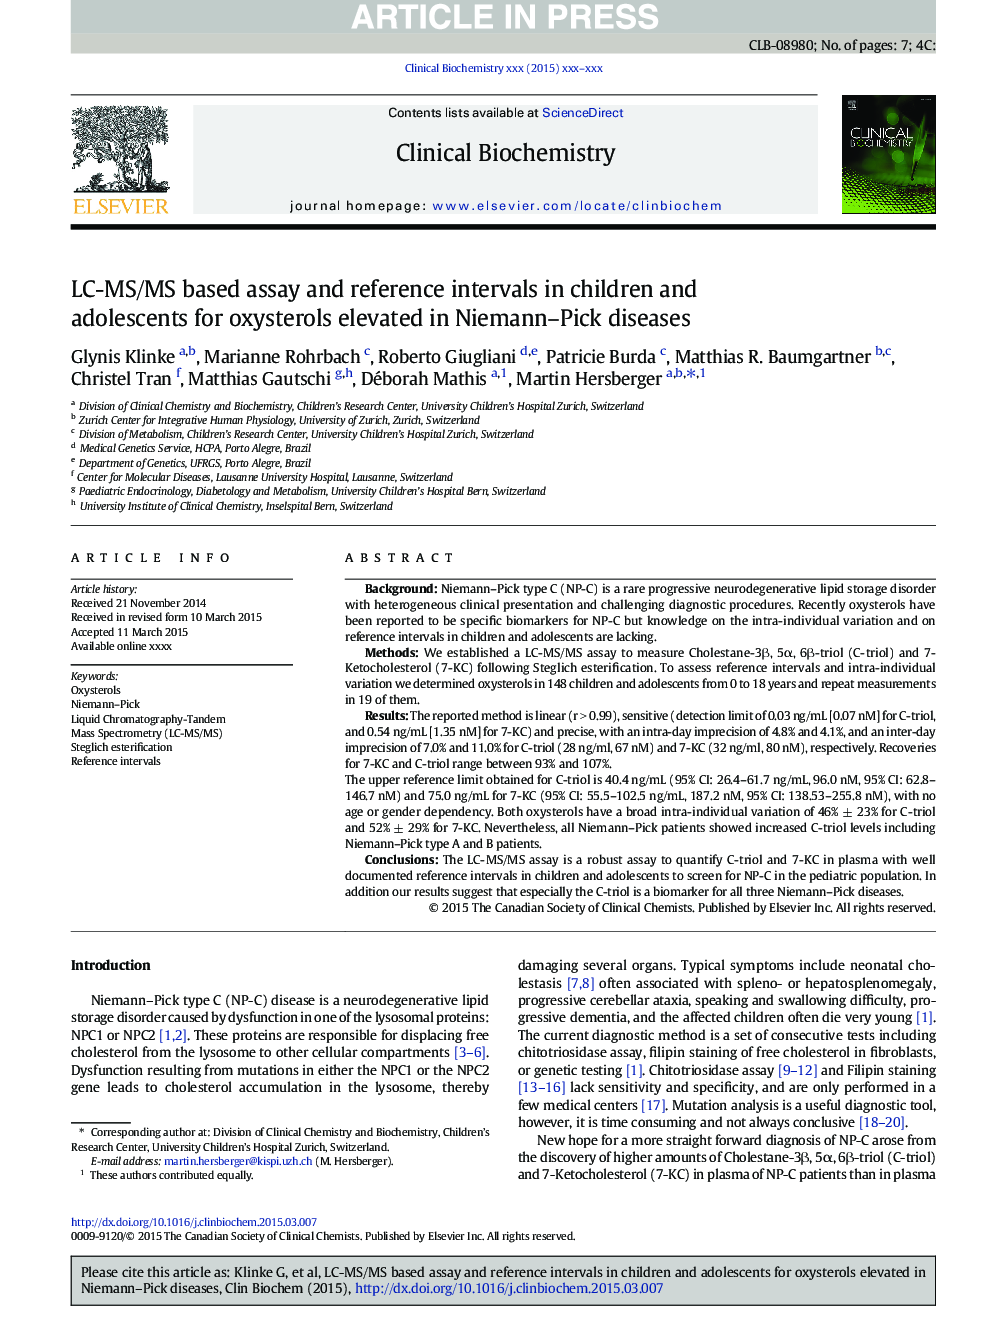 LC-MS/MS based assay and reference intervals in children and adolescents for oxysterols elevated in Niemann-Pick diseases